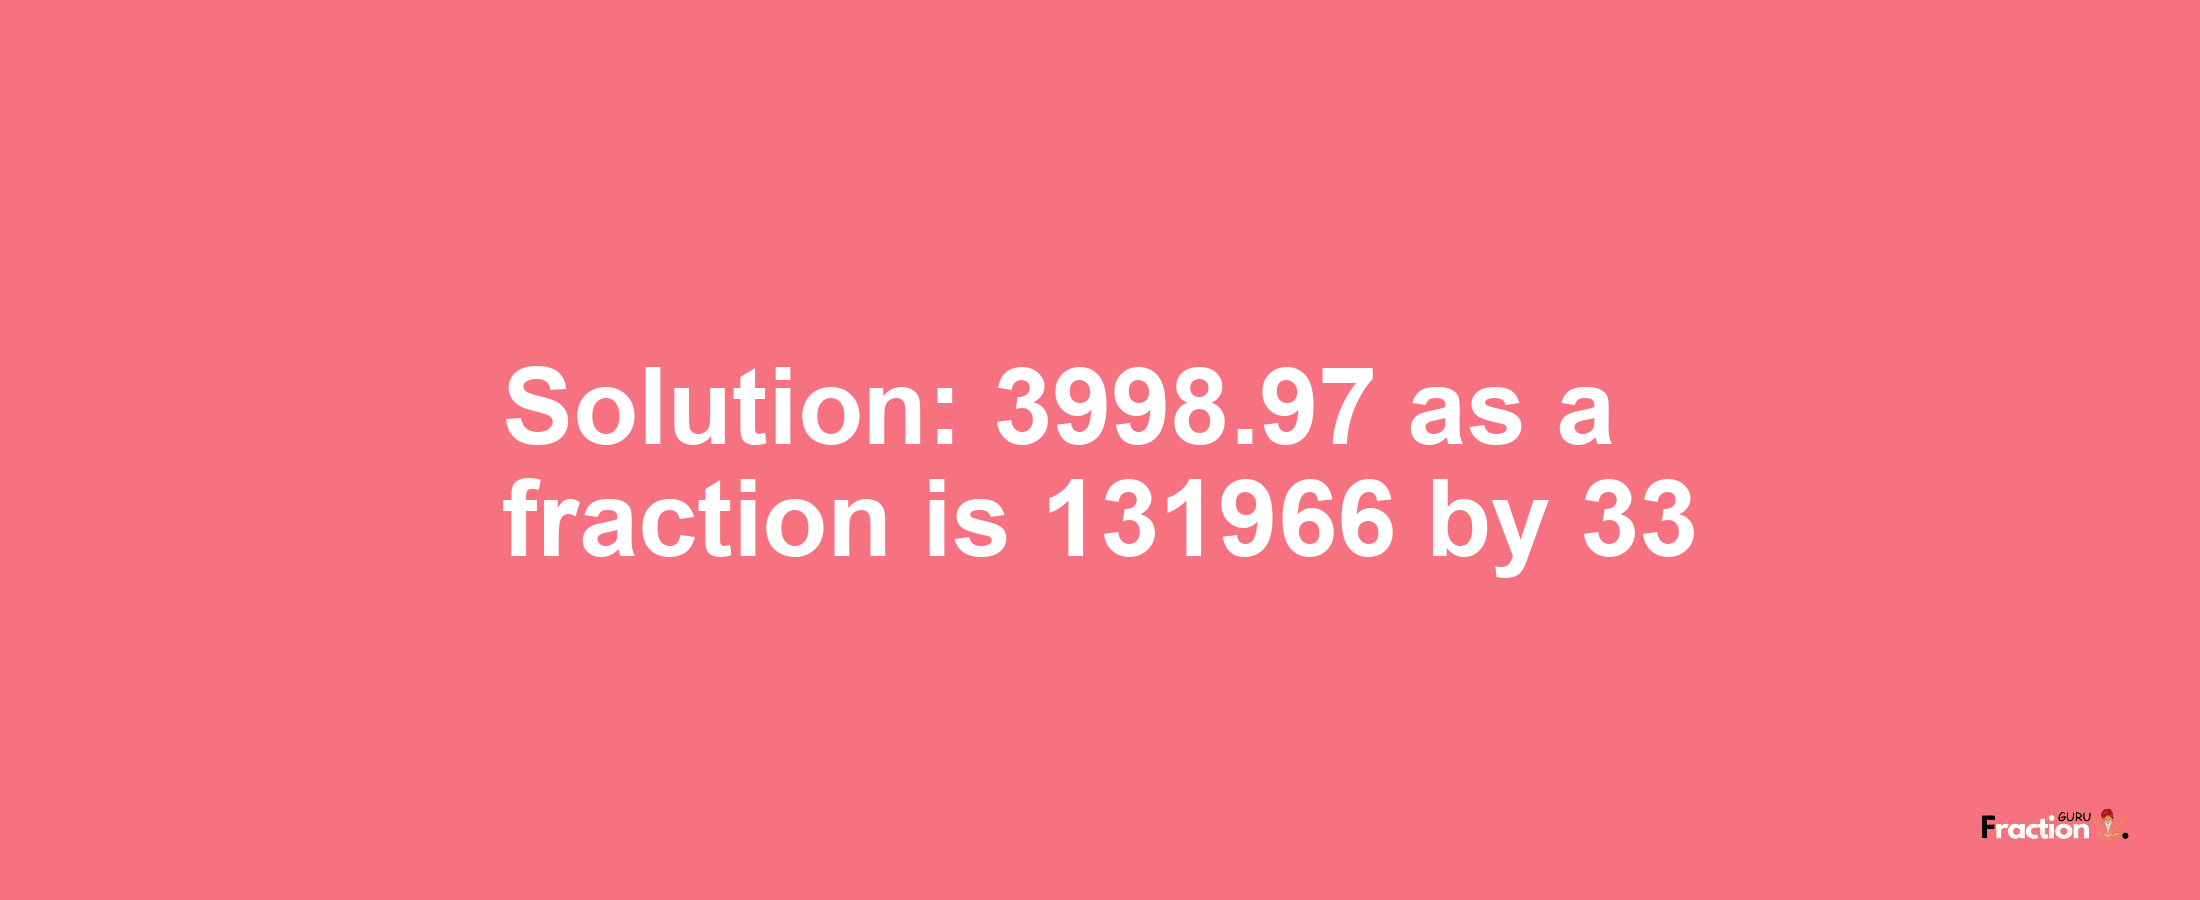 Solution:3998.97 as a fraction is 131966/33